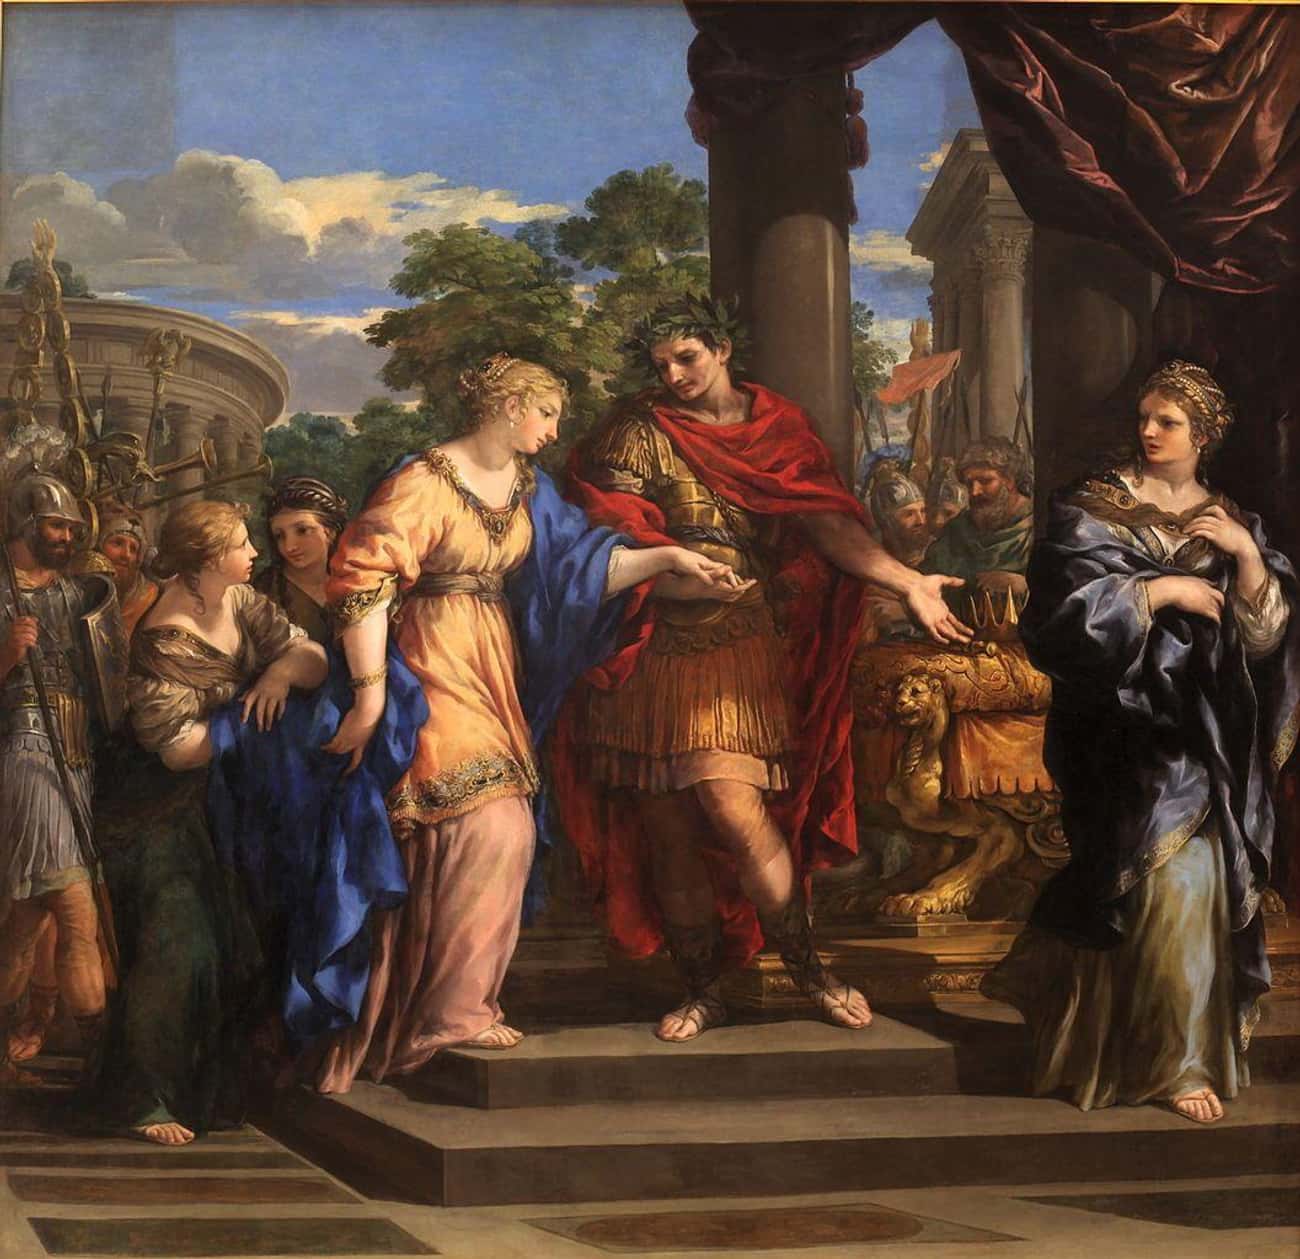 Cleopatra Used Julius Caesar to Help Her Get the Throne